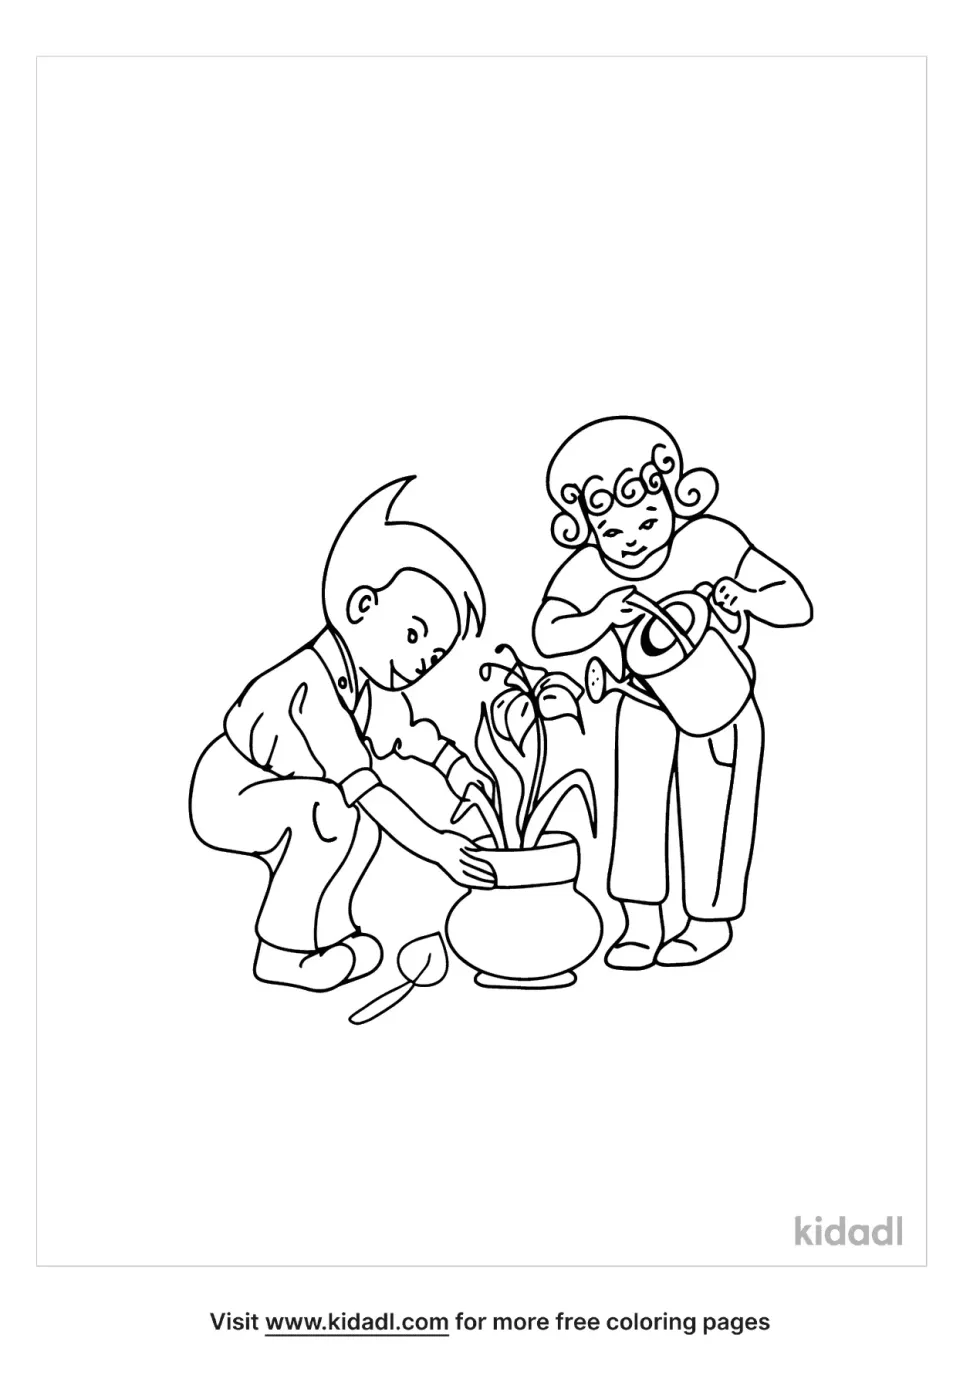 Helping Others Coloring Page